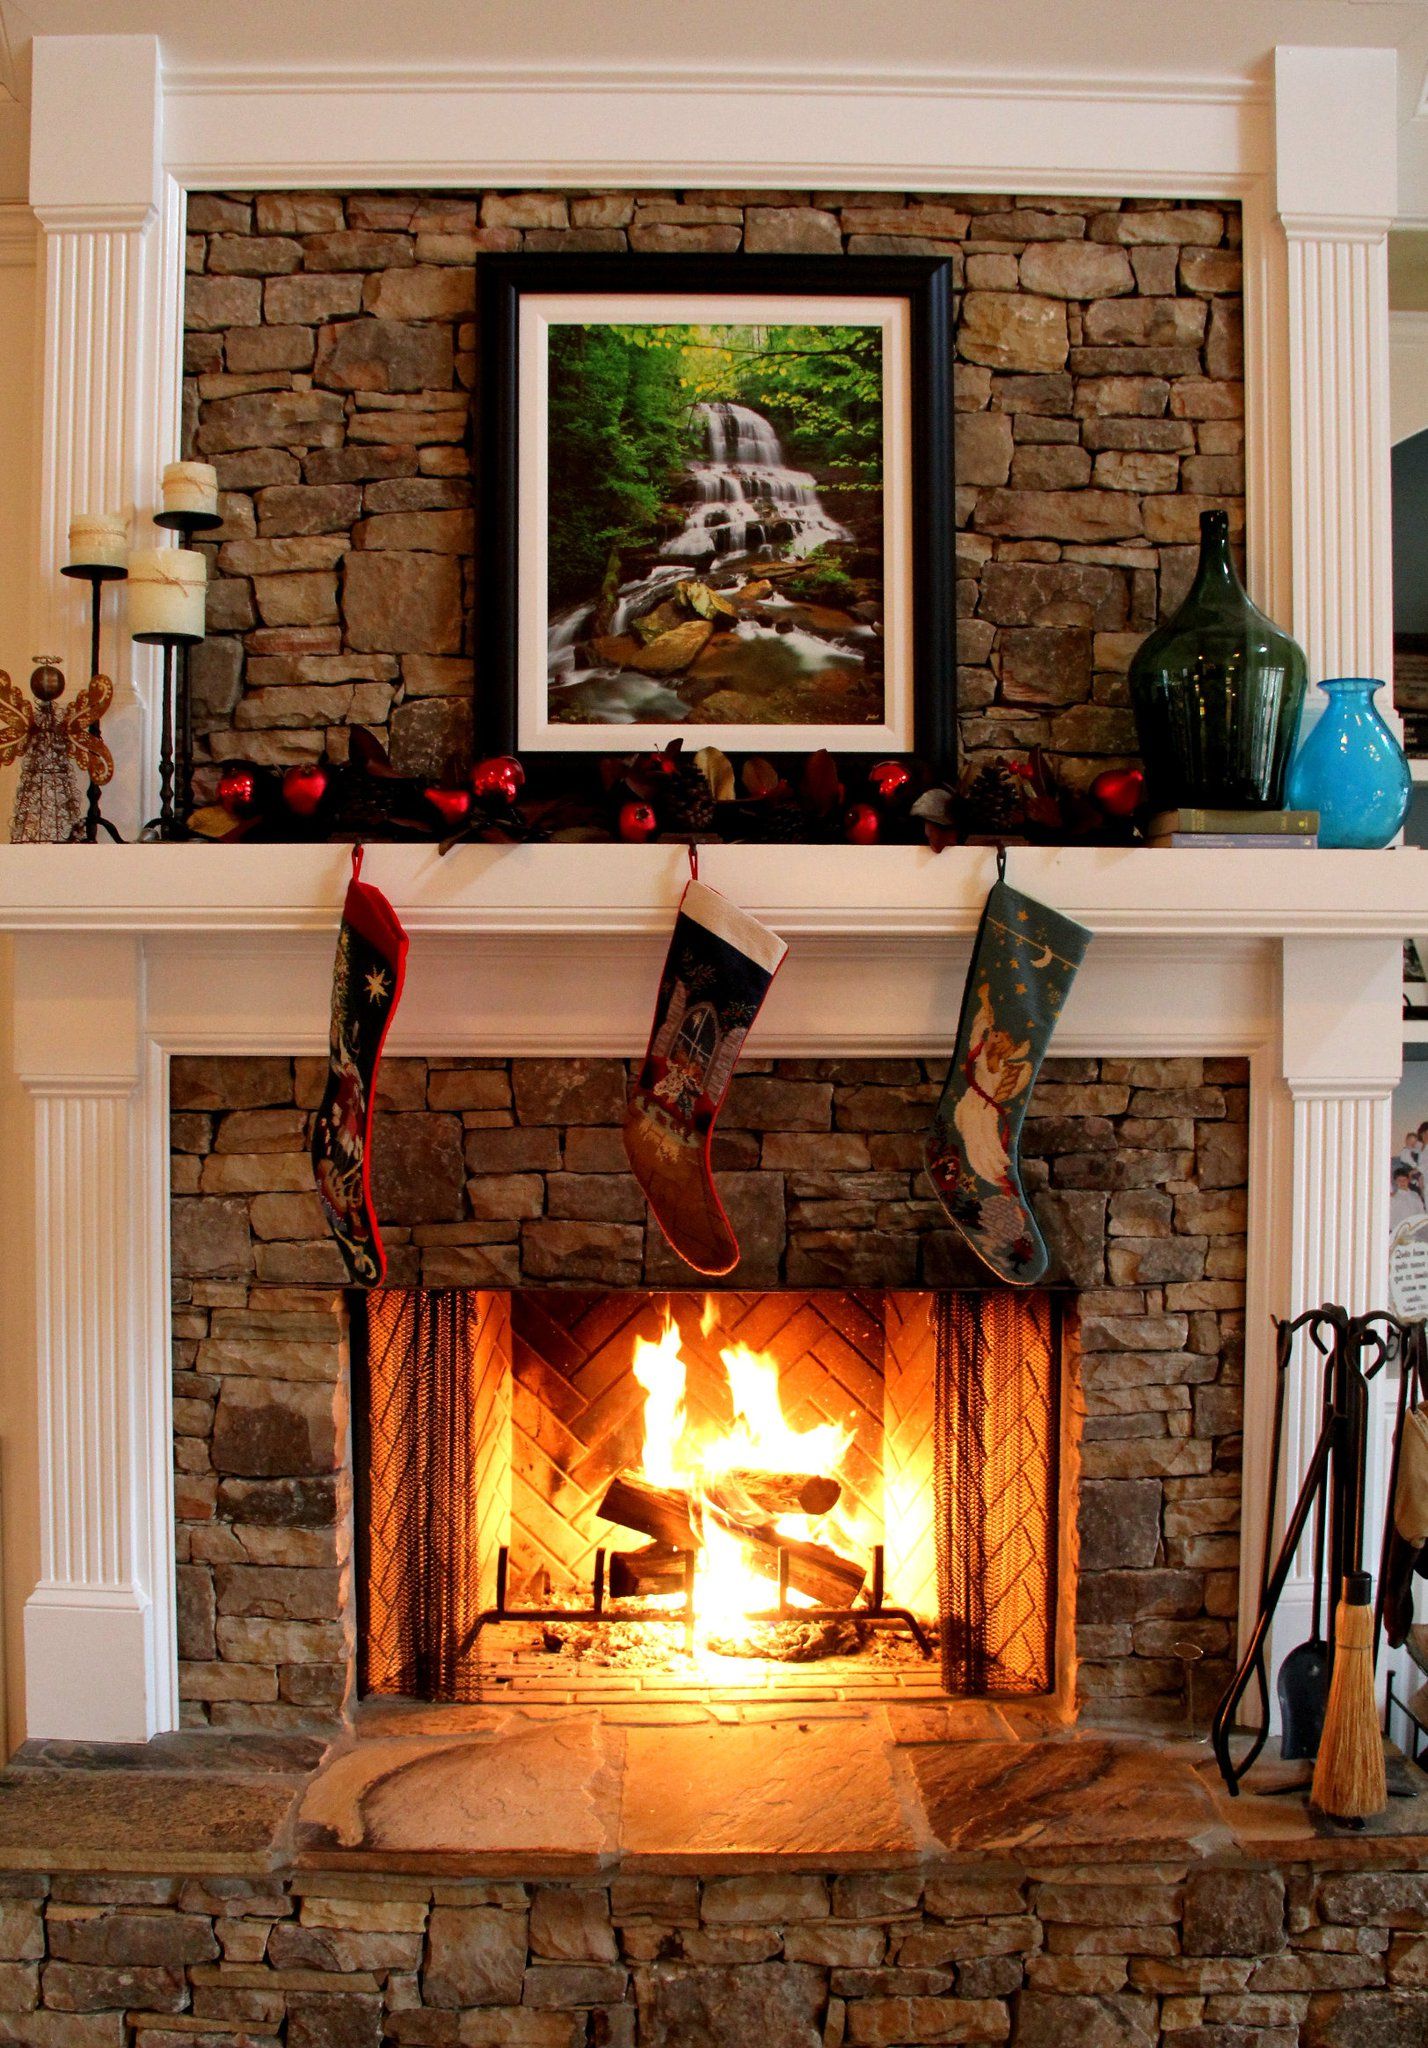 How to Build A Brick Fireplace Awesome Pin On House Building Projects